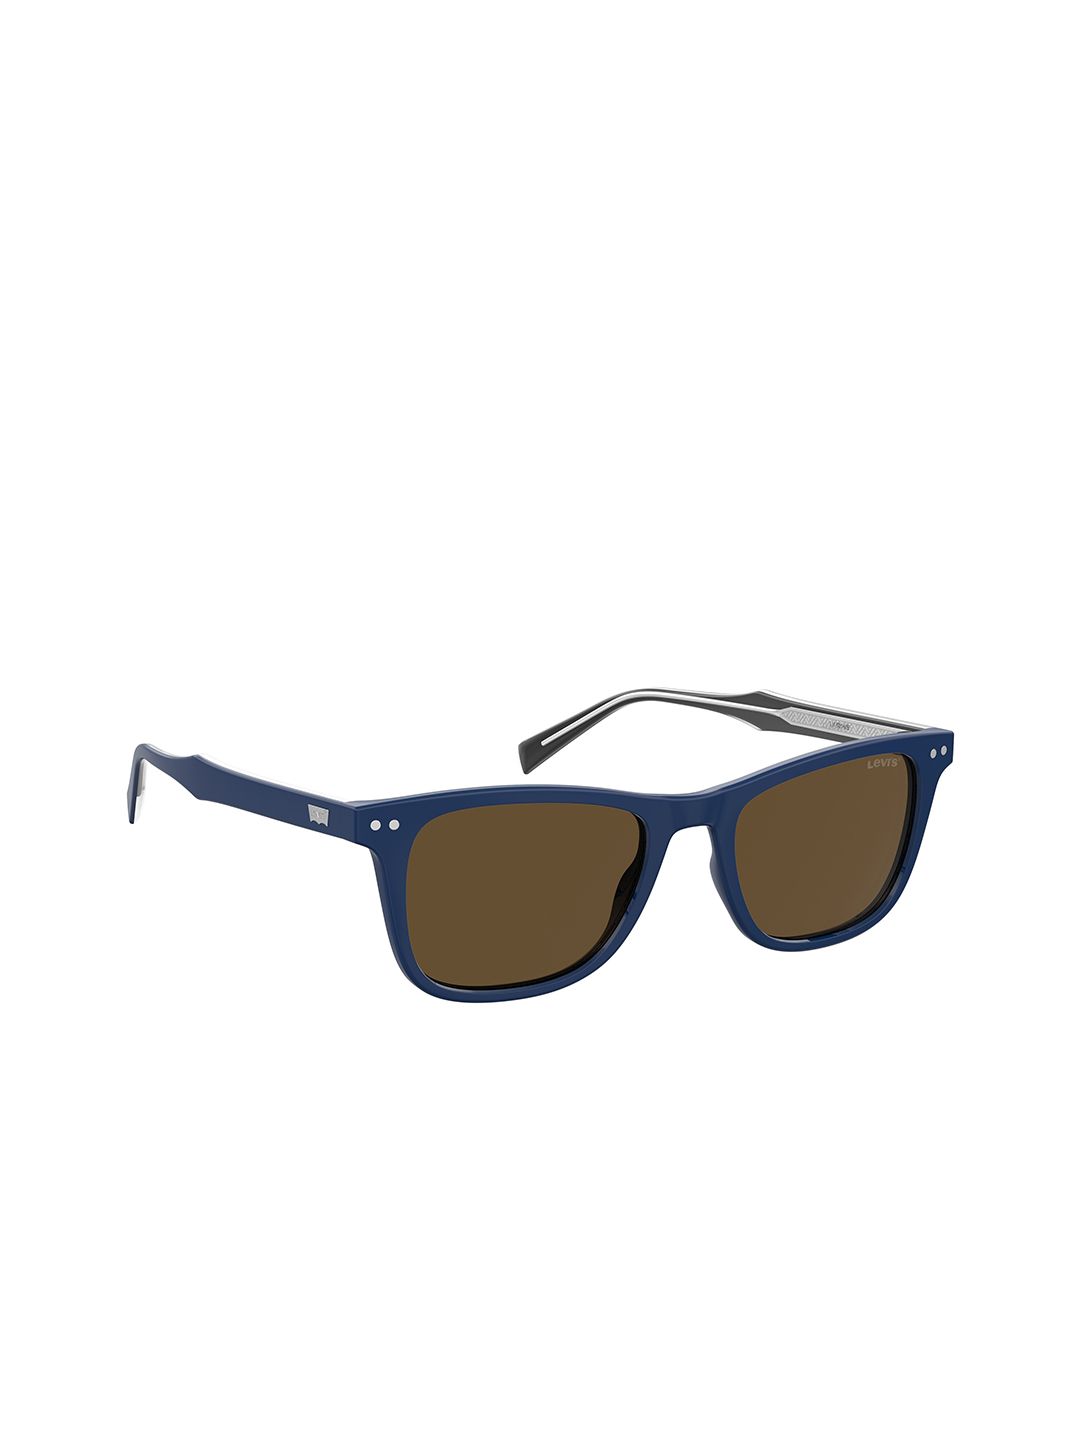 Levis Unisex Brown Lens & Blue Square Sunglasses with UV Protected Lens LV 5016/S PJP 5270-Brown Price in India